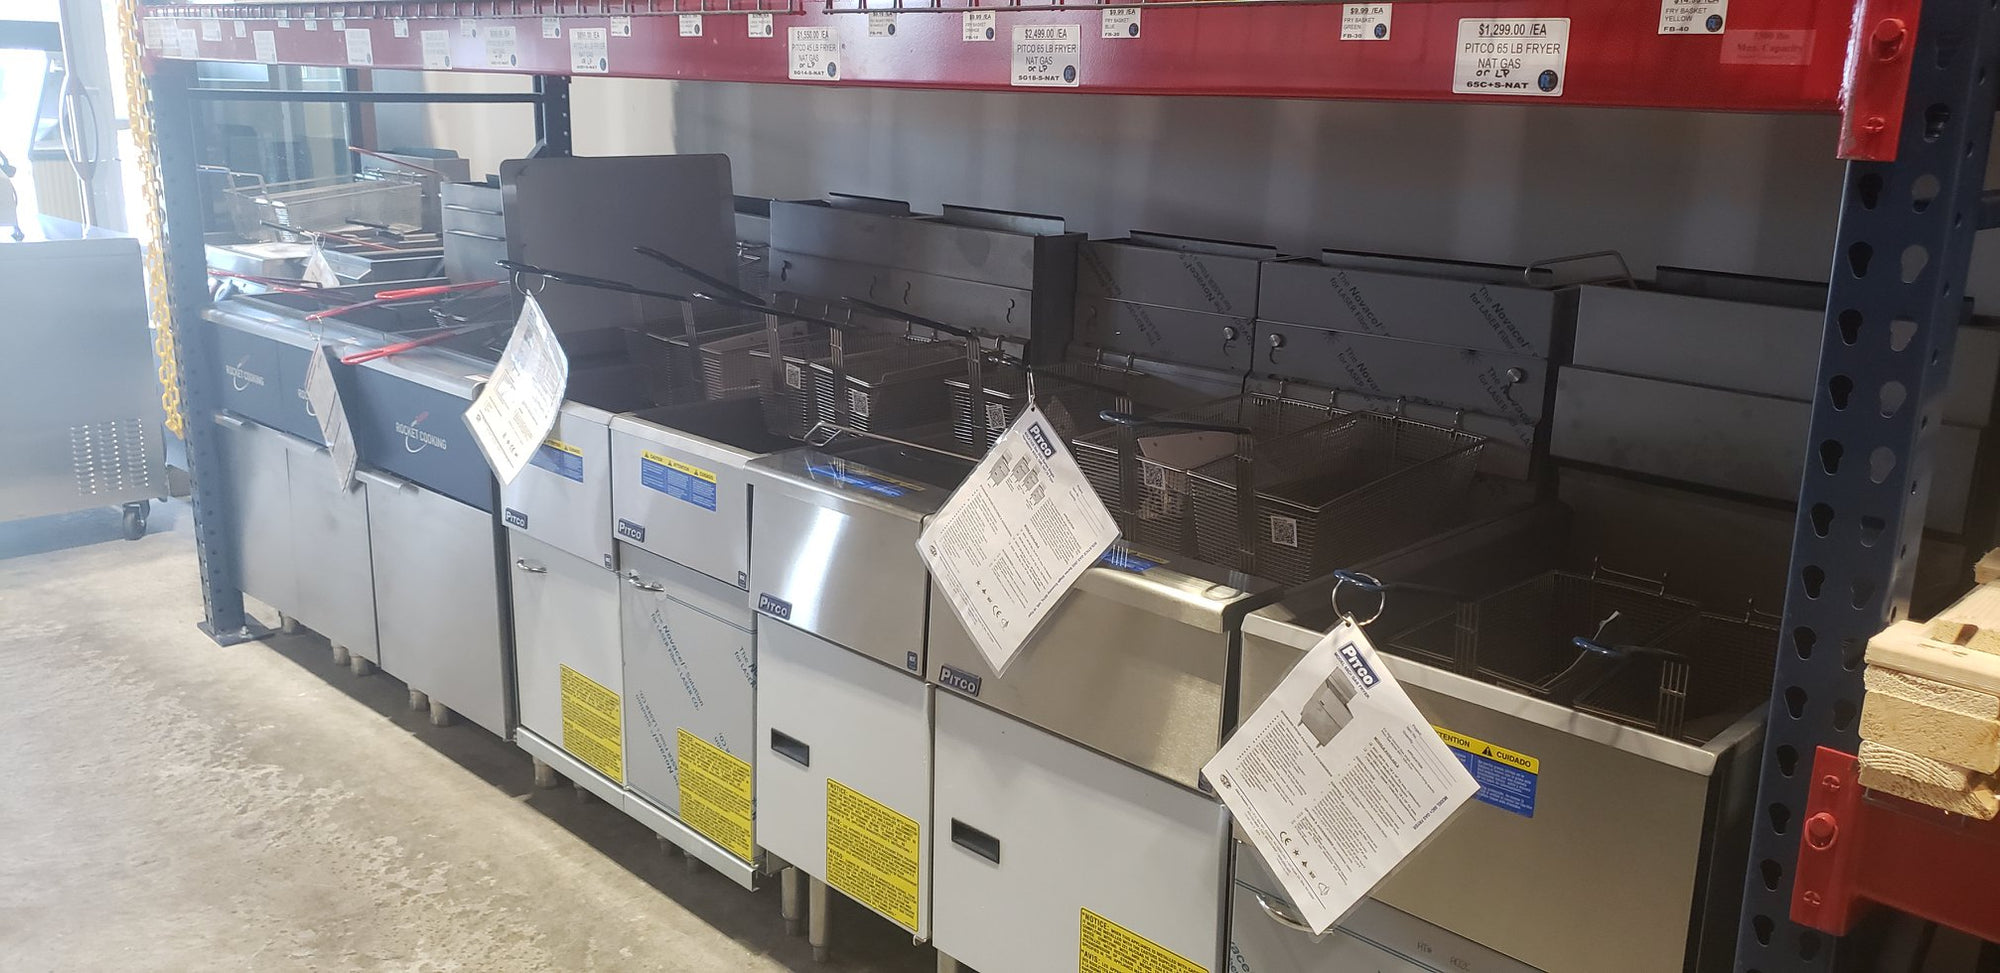 Fryers from Pitco, Vulcan, Atosa, Padela, Sierra, and more!  All capacities and types available in stock and priced great!